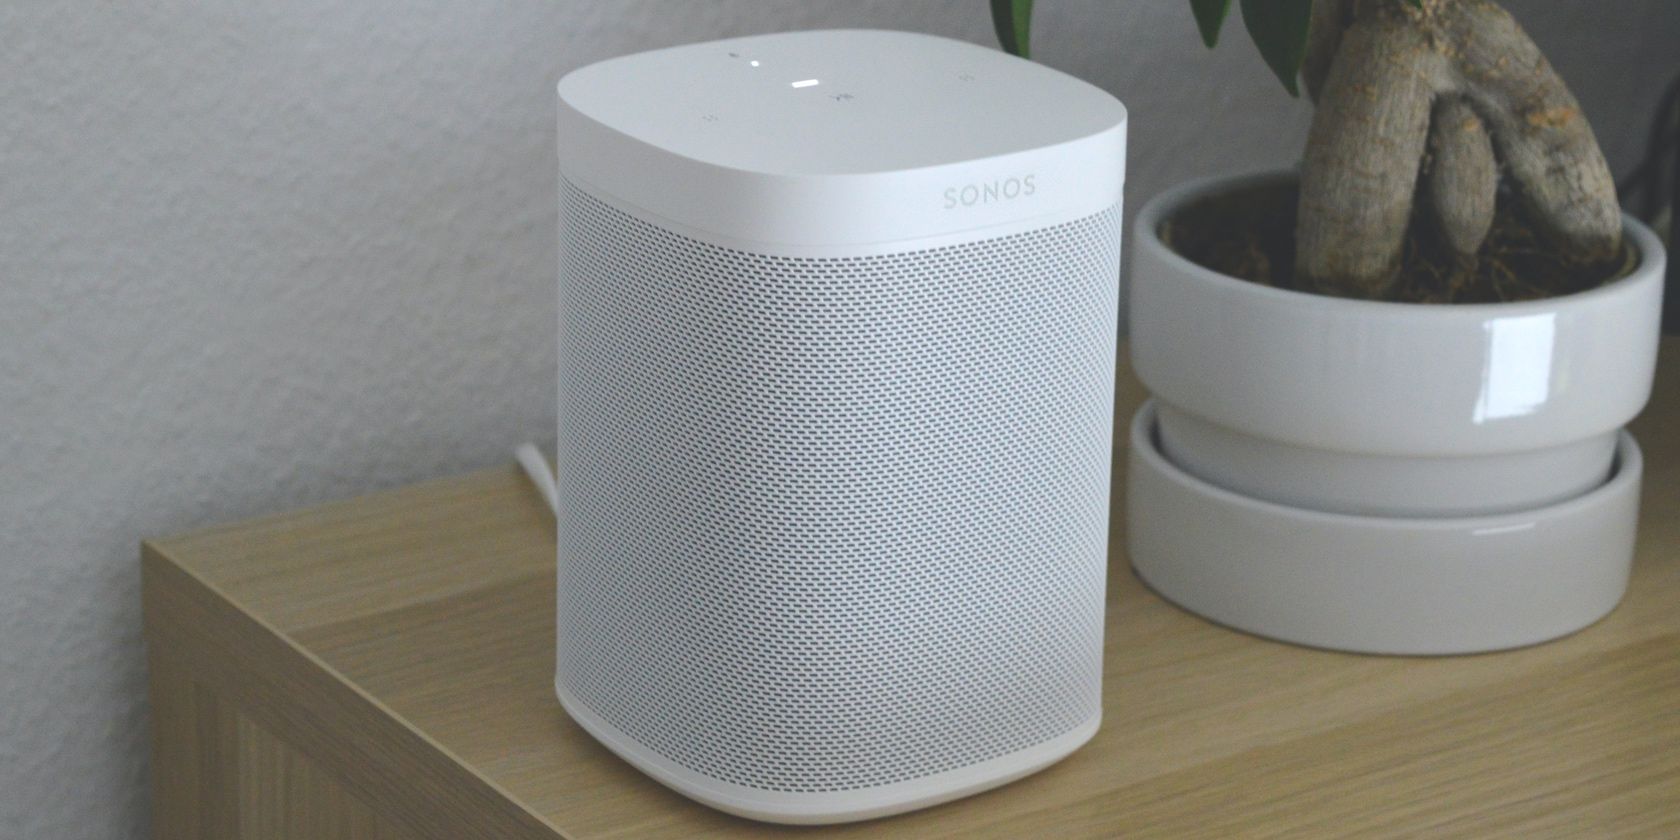 How to Add Voice to Your Sonos One